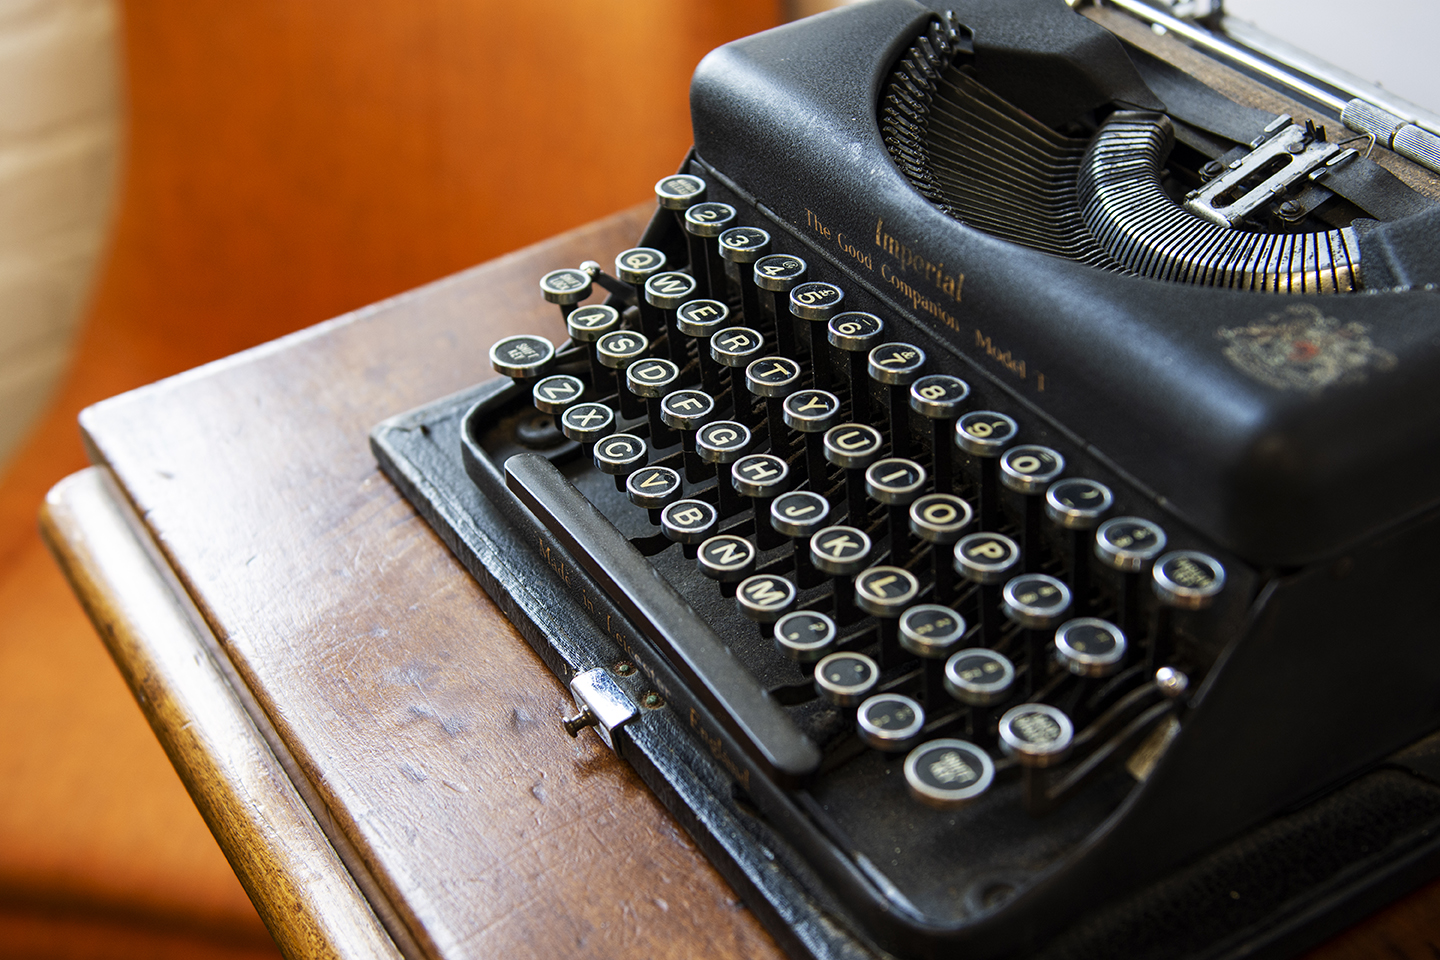 An old-fashioned typewriter. You probably won't use this for the job.